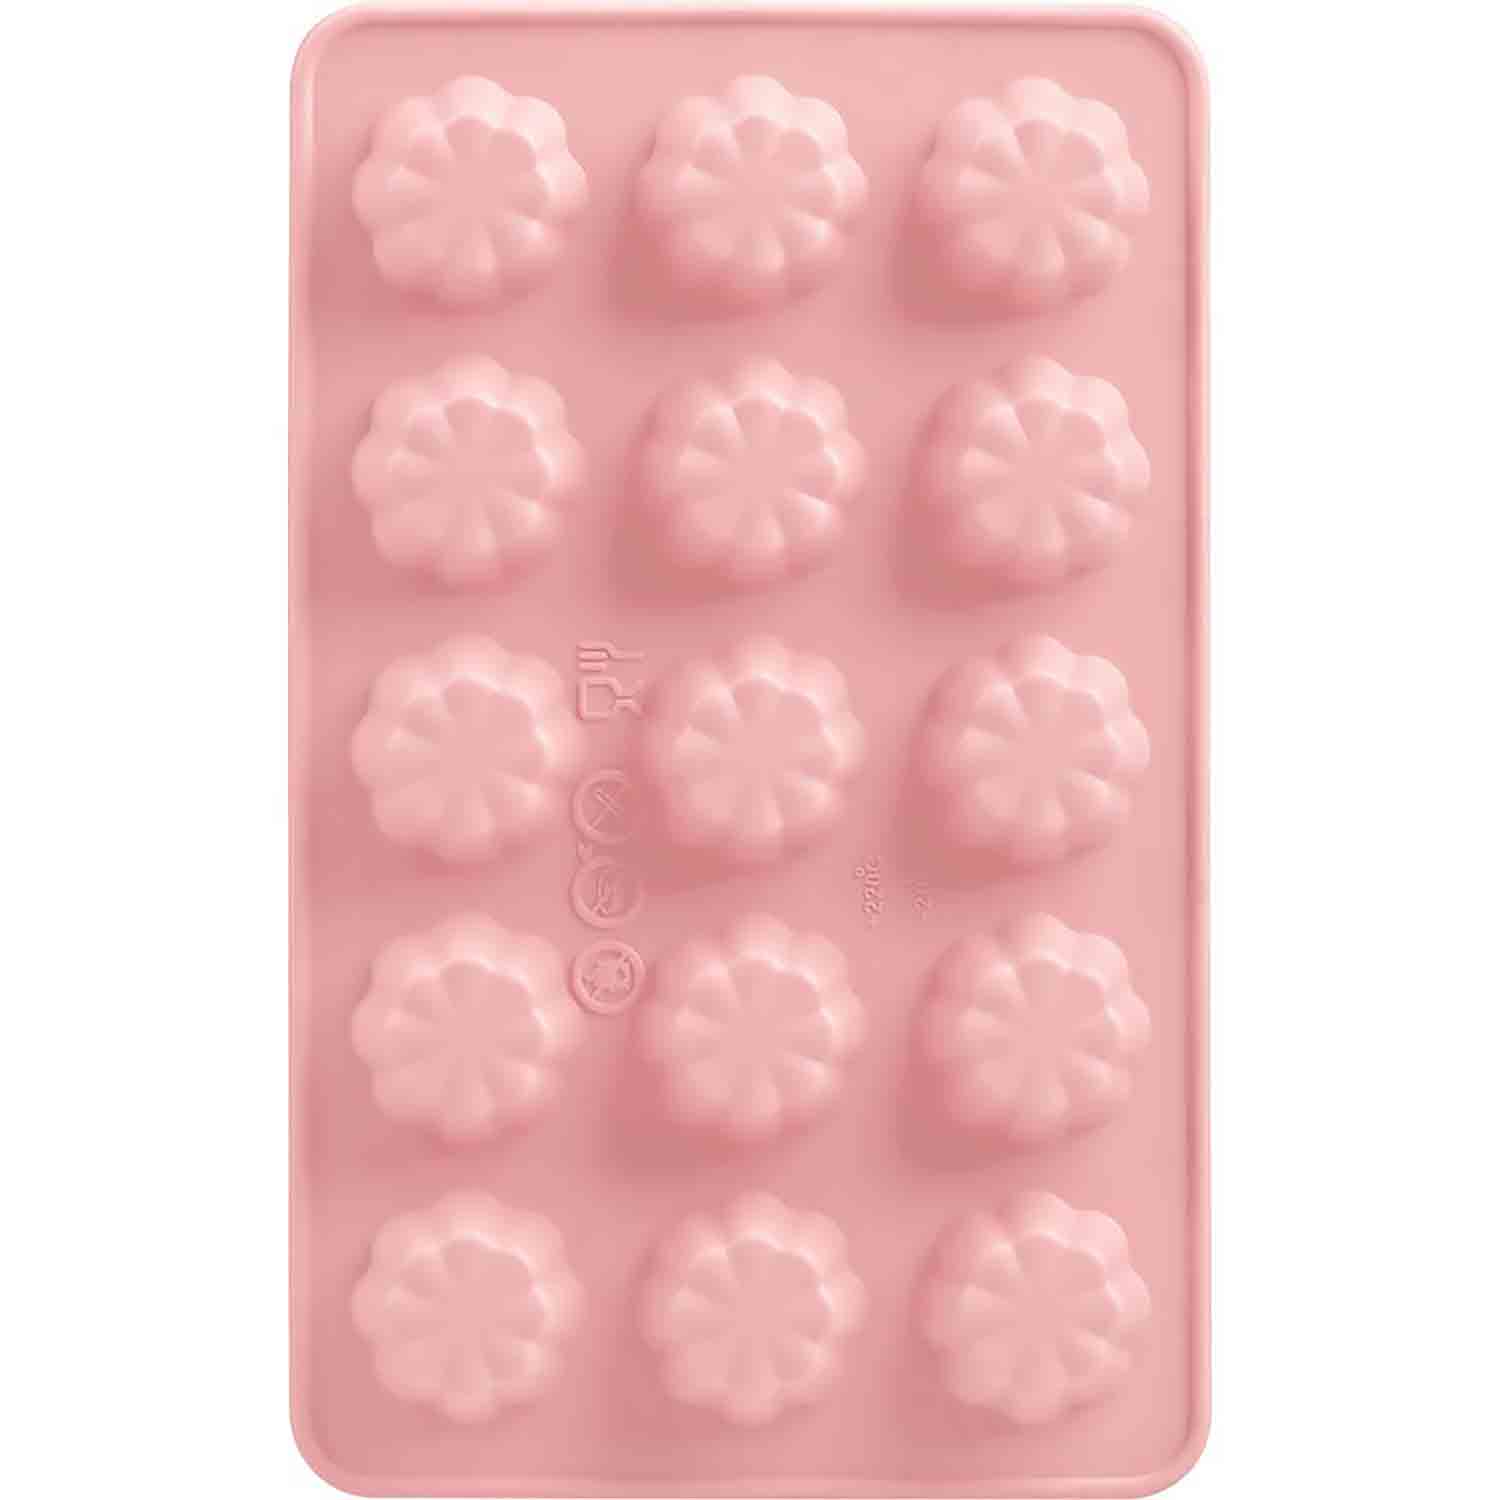 Trudeau Maison Silicone Chocolate and Candy Molds - Flowers - Set of 3